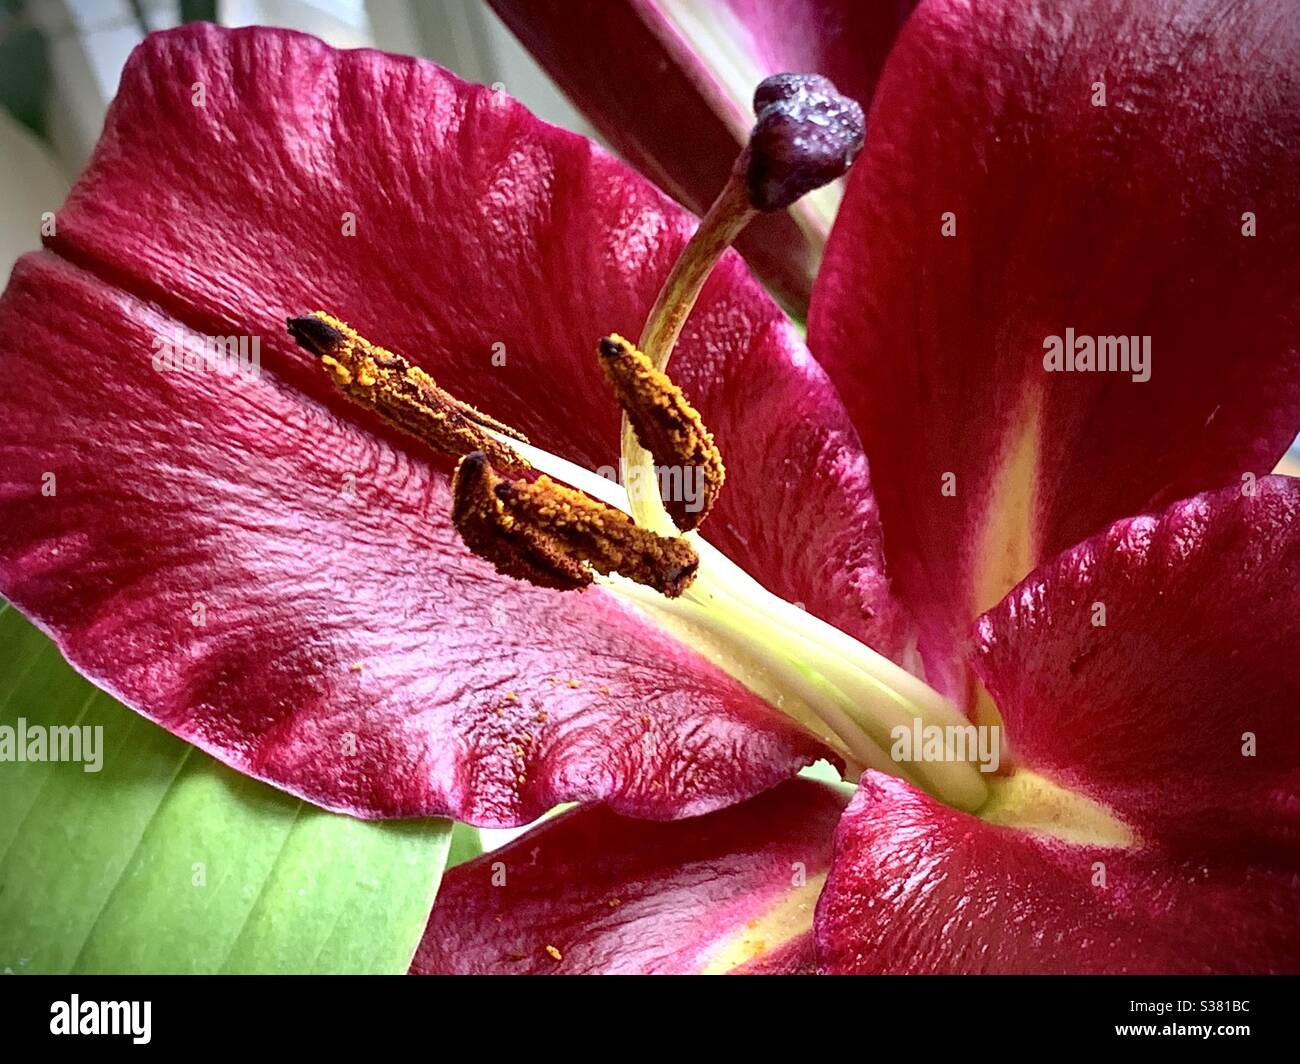 The gorgeous sight of a Lilly flower in full bloom. If only you could smell it! Stock Photo